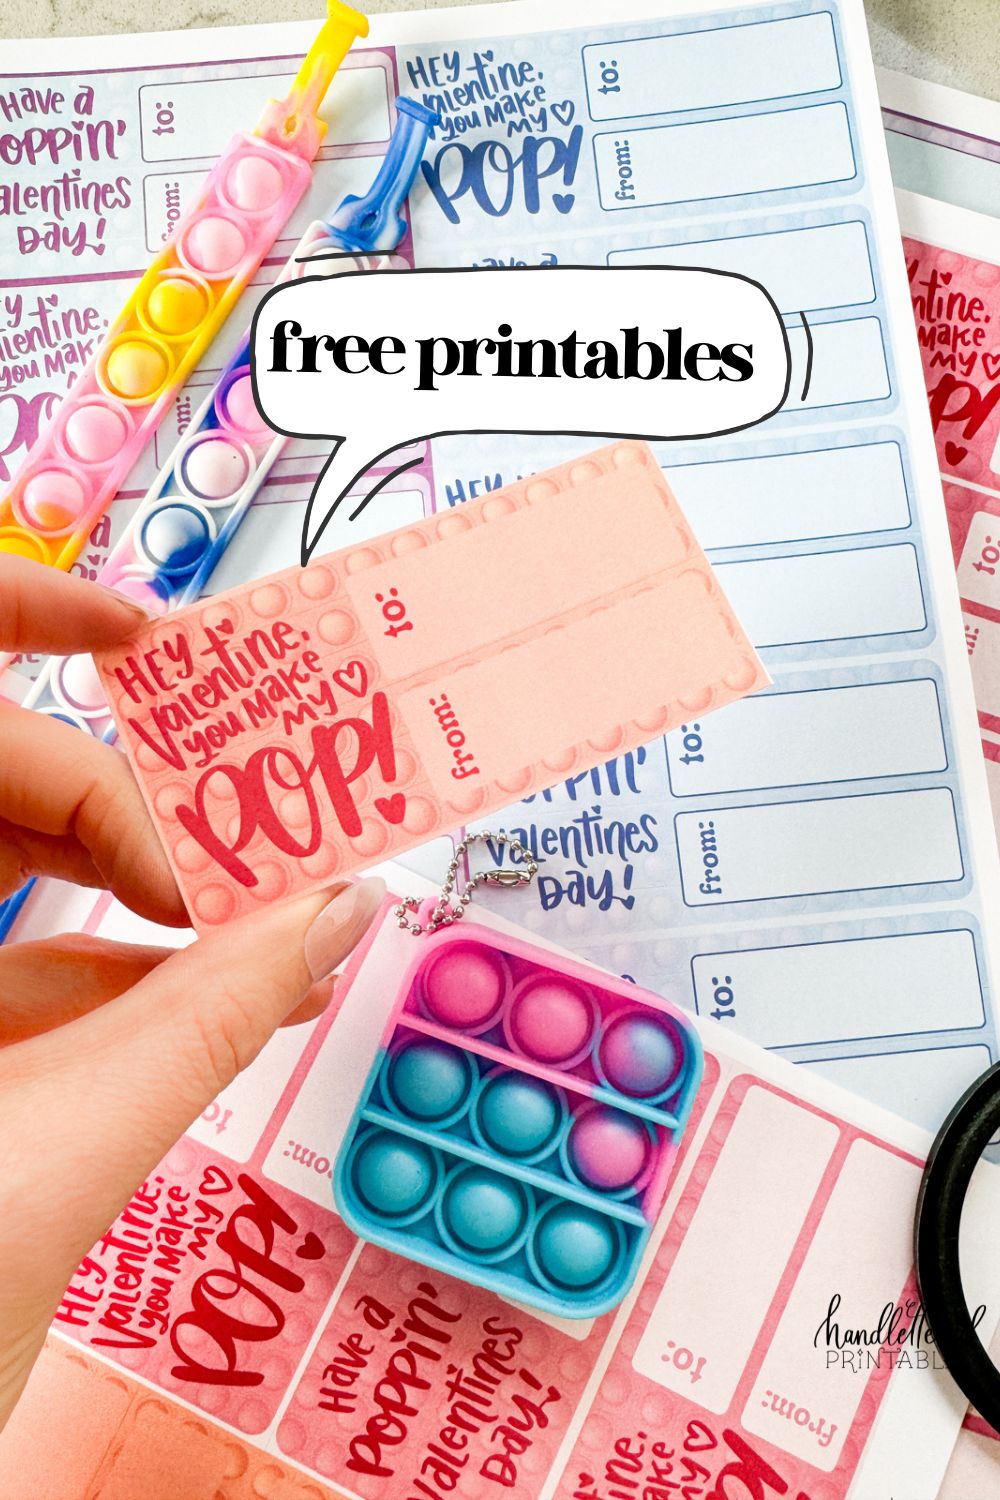 text reads: free printables pop it themed valentines cards printed and styled with popits. 4 color schemes with two sentiments: hey valentine, you make my heart pop' (held in photo) and 'have a poppin valentines day'.